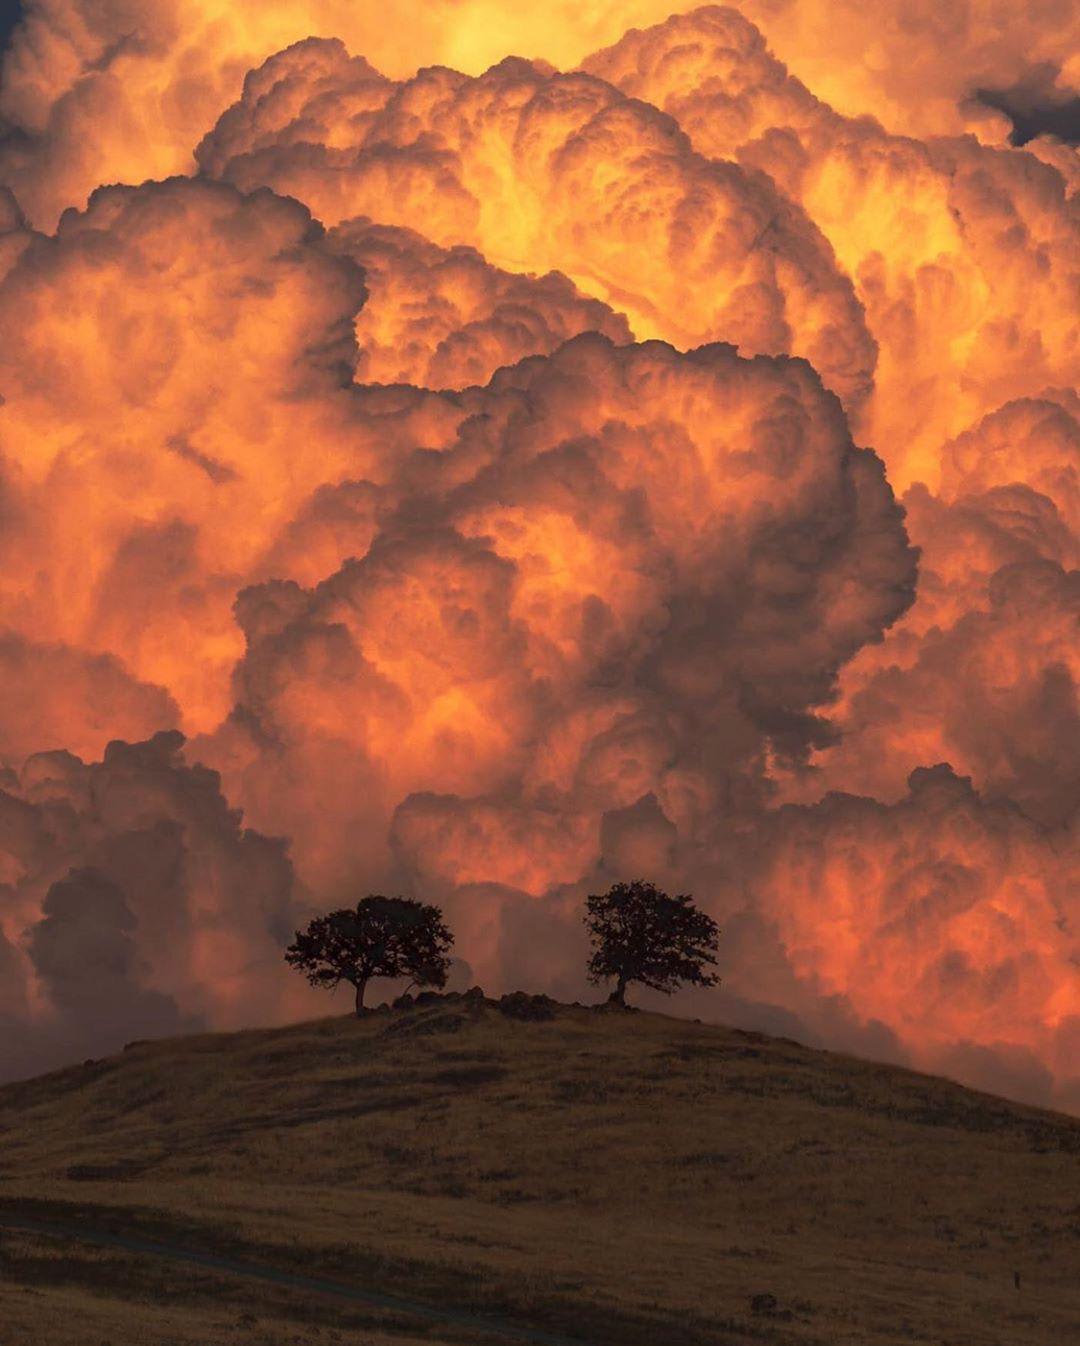 Towering thunder clouds that were captured during a sunset created the most amazing, yet haunting effect.